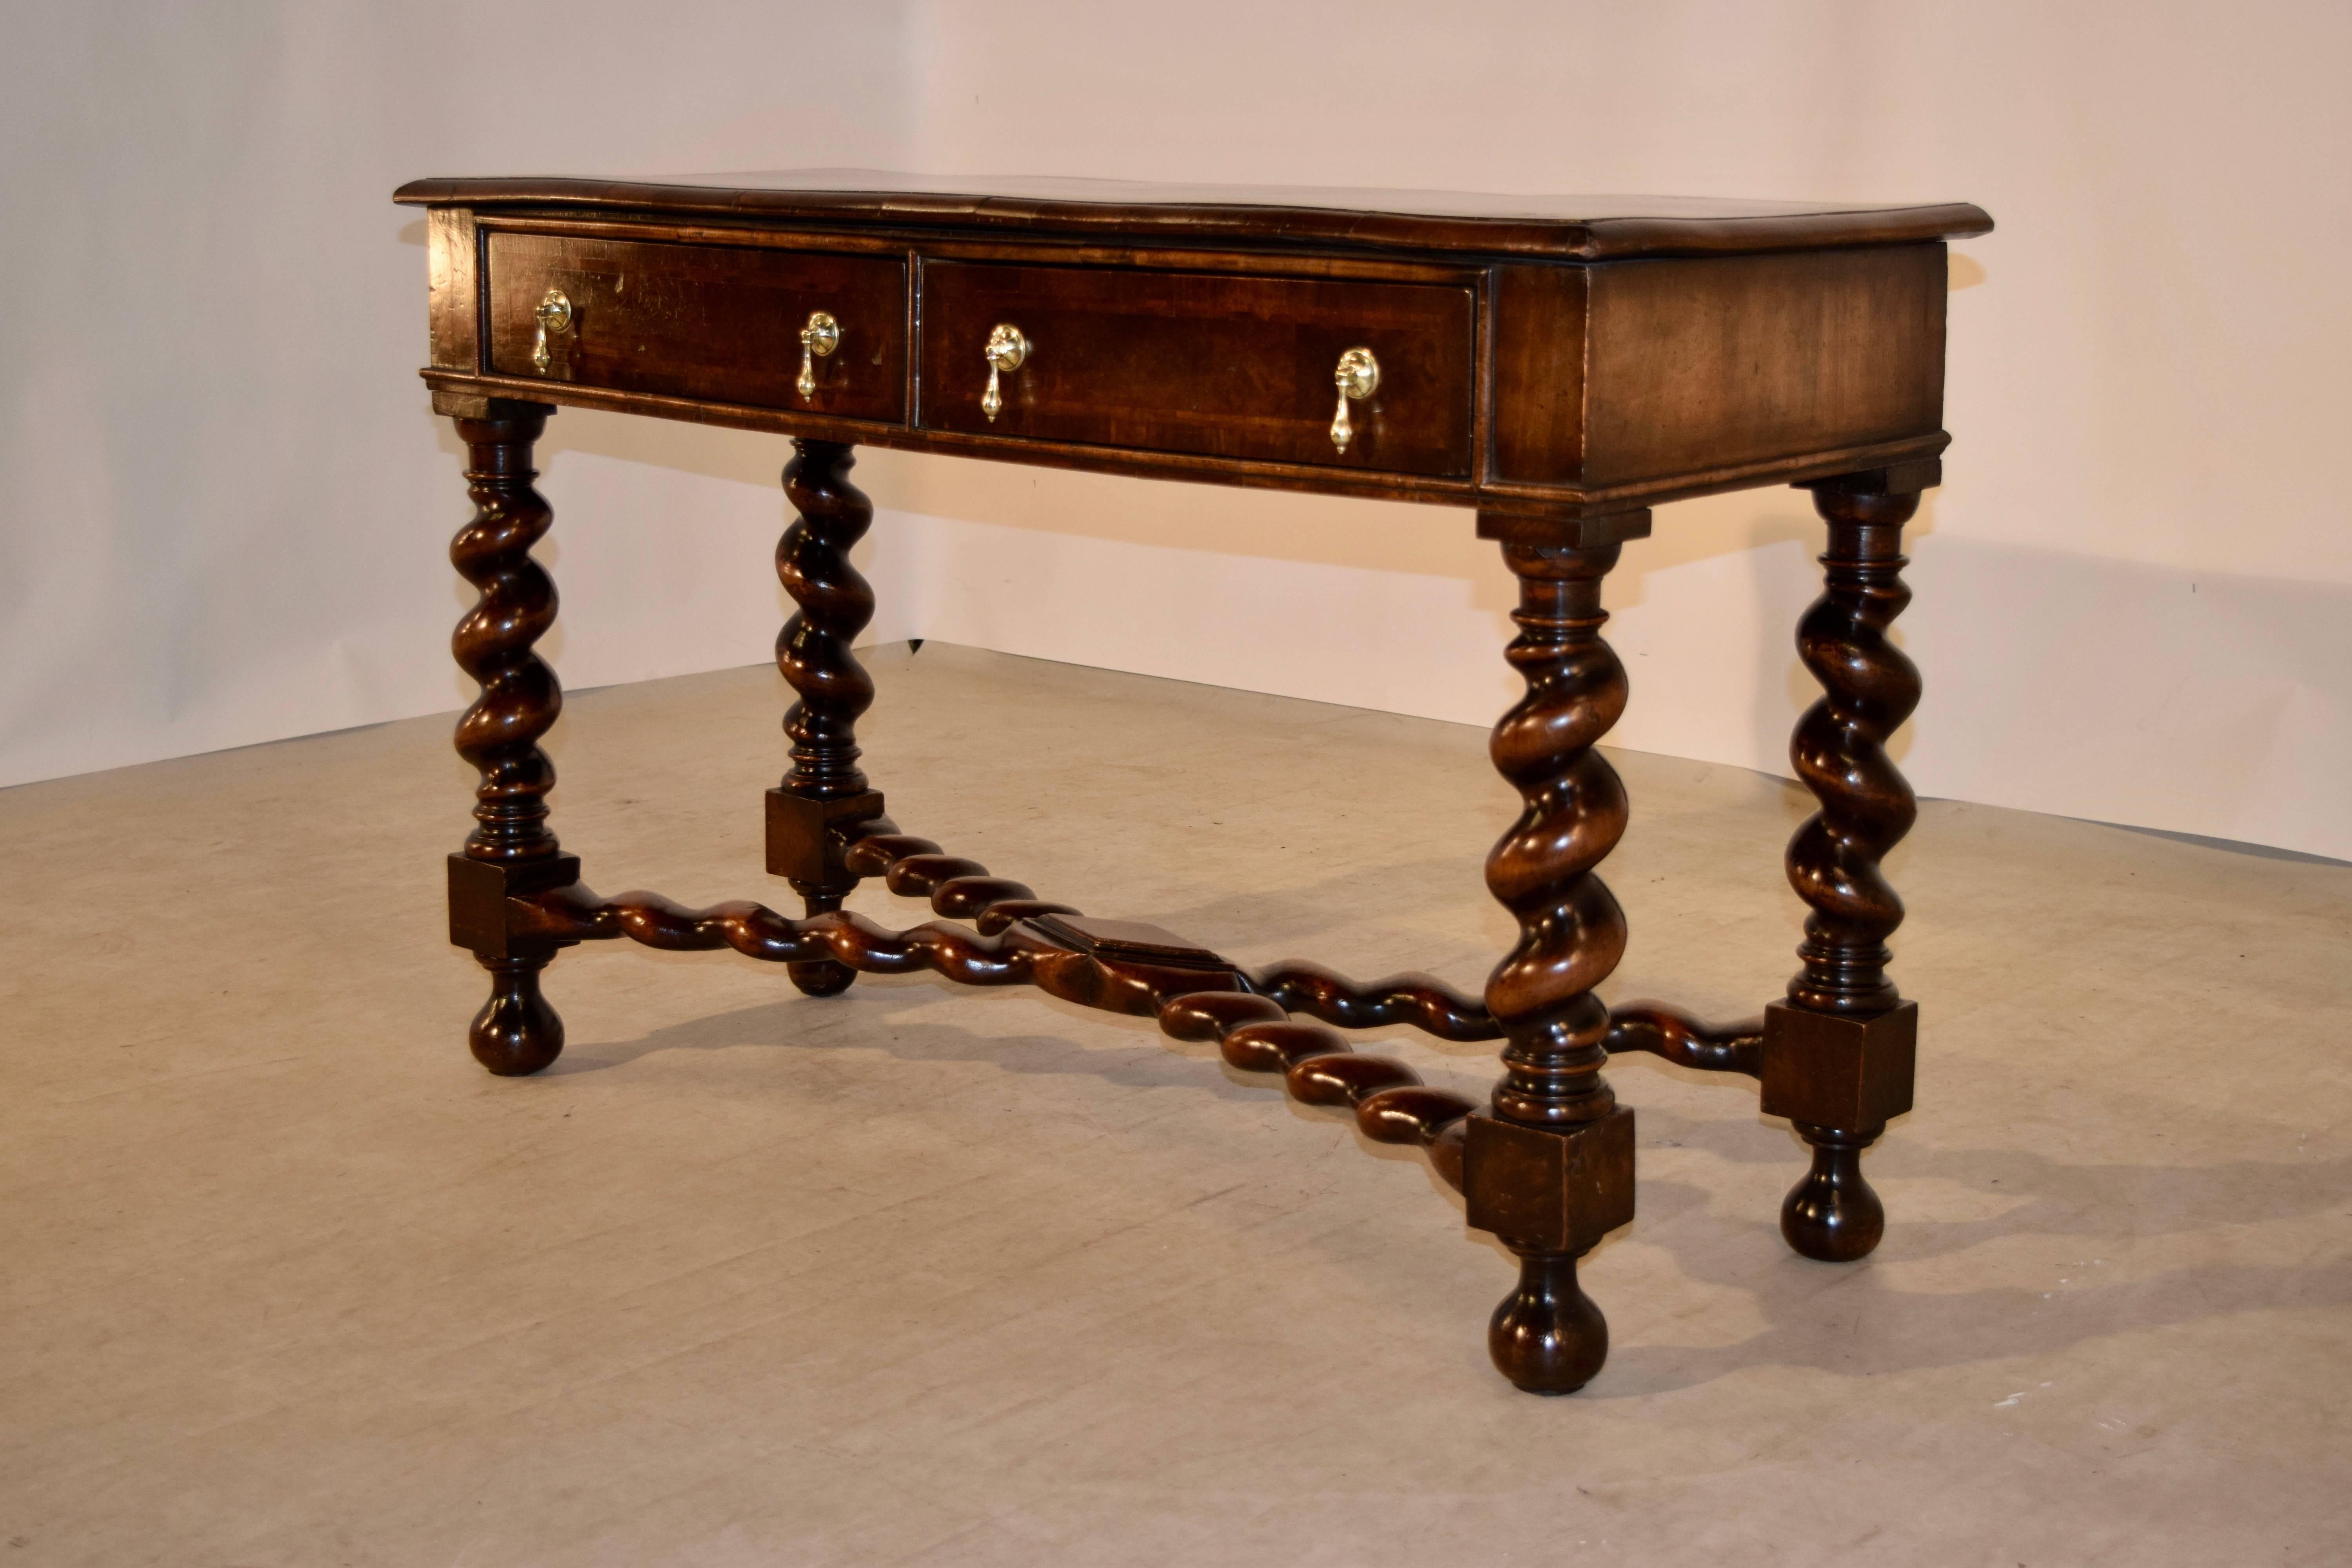 19th century walnut console from England. The top is banded and has a bookmatched walnut top and bevelled edge, following down to a simple apron and two drawers in the front. The piece is supported on thick hand-turned barley twist legs, joined by